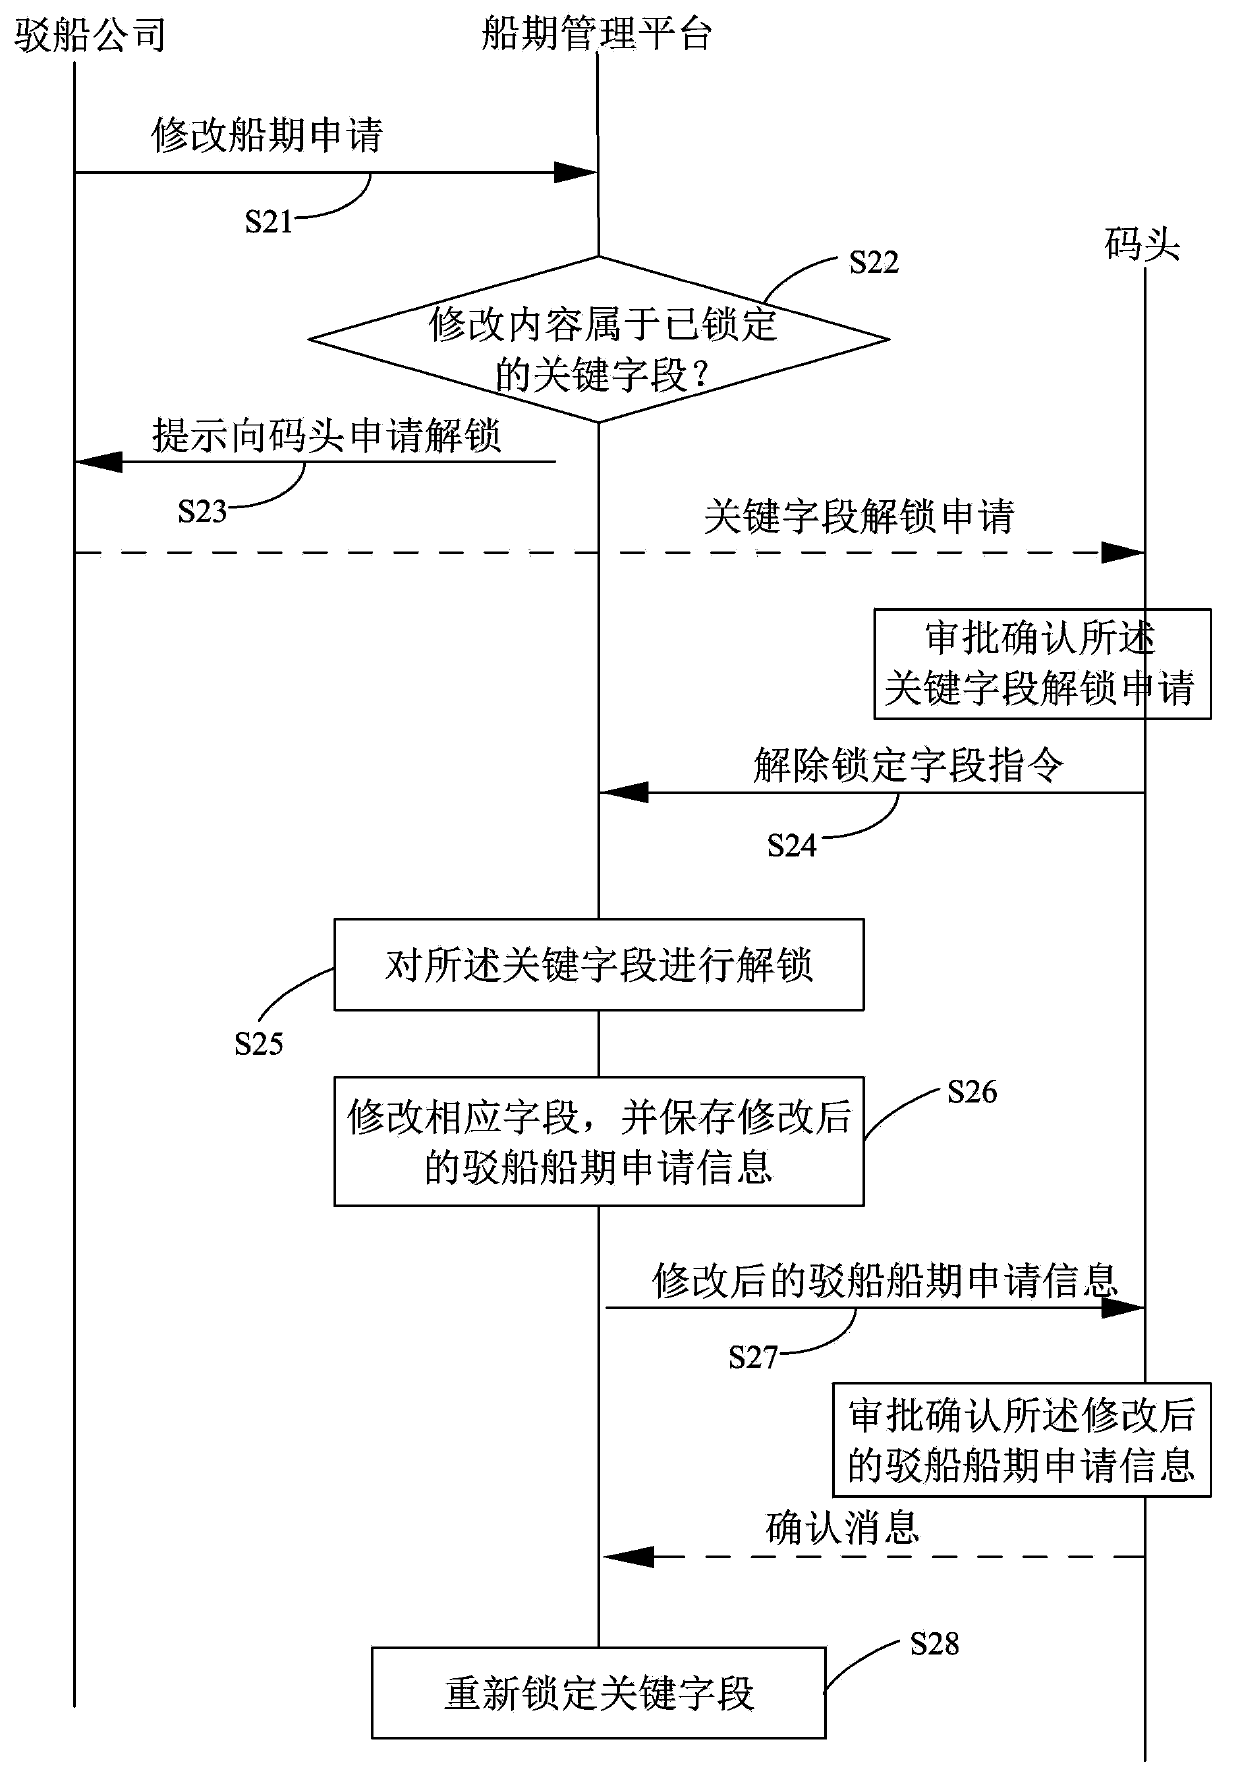 Barge schedule management method and barge schedule management system